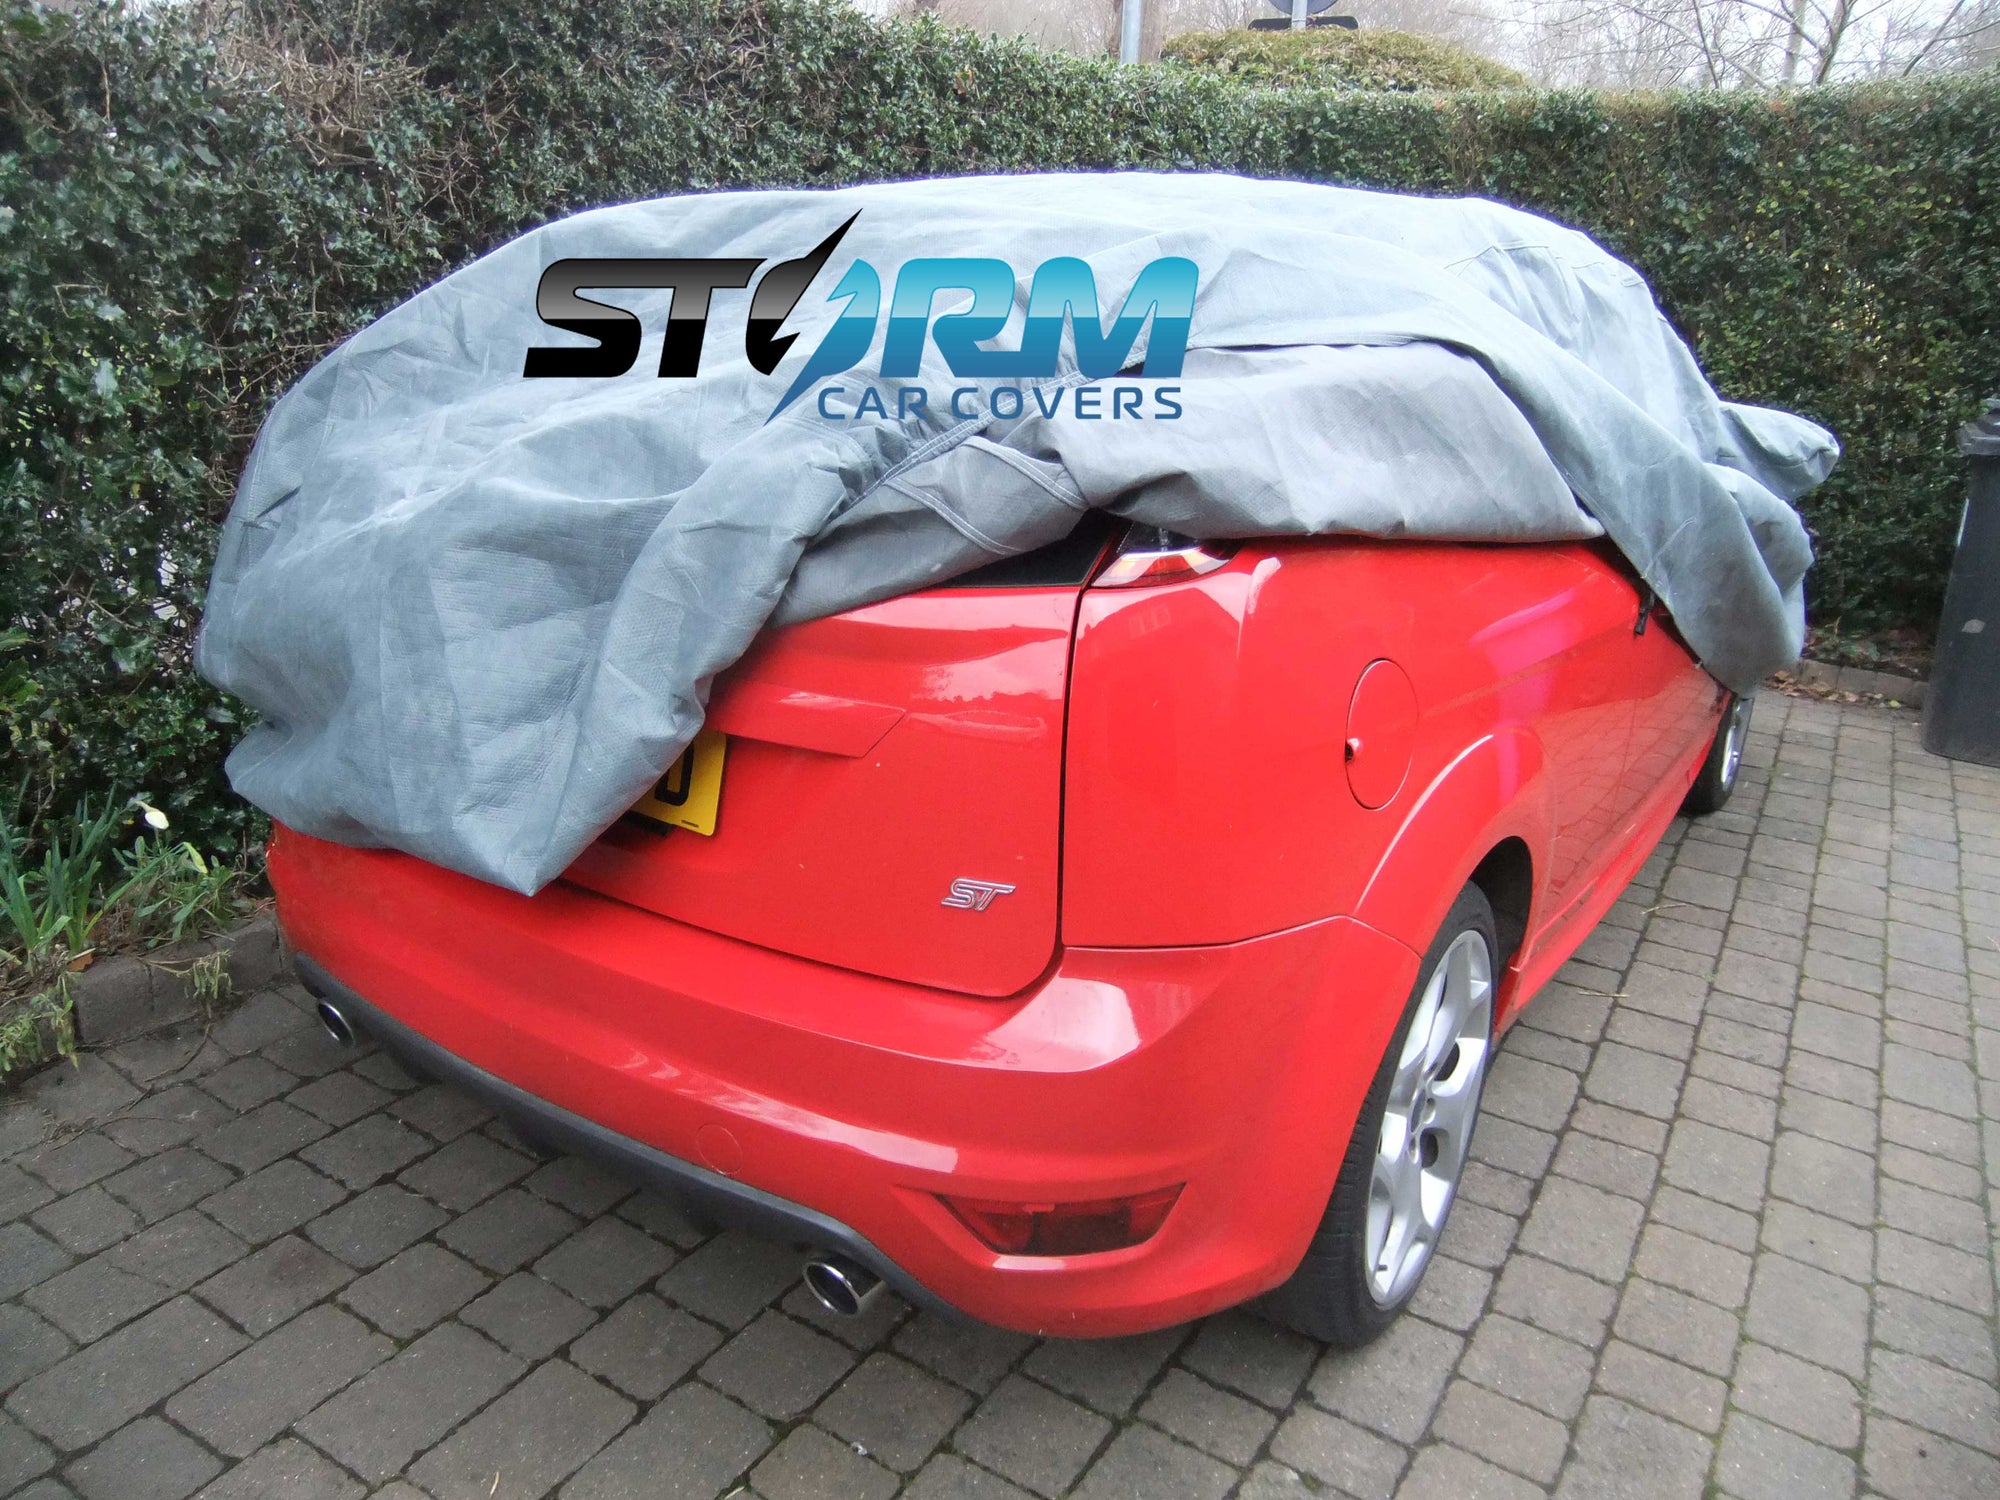 Stormforce outdoor breathable car covers for SMART - Storm Car Covers